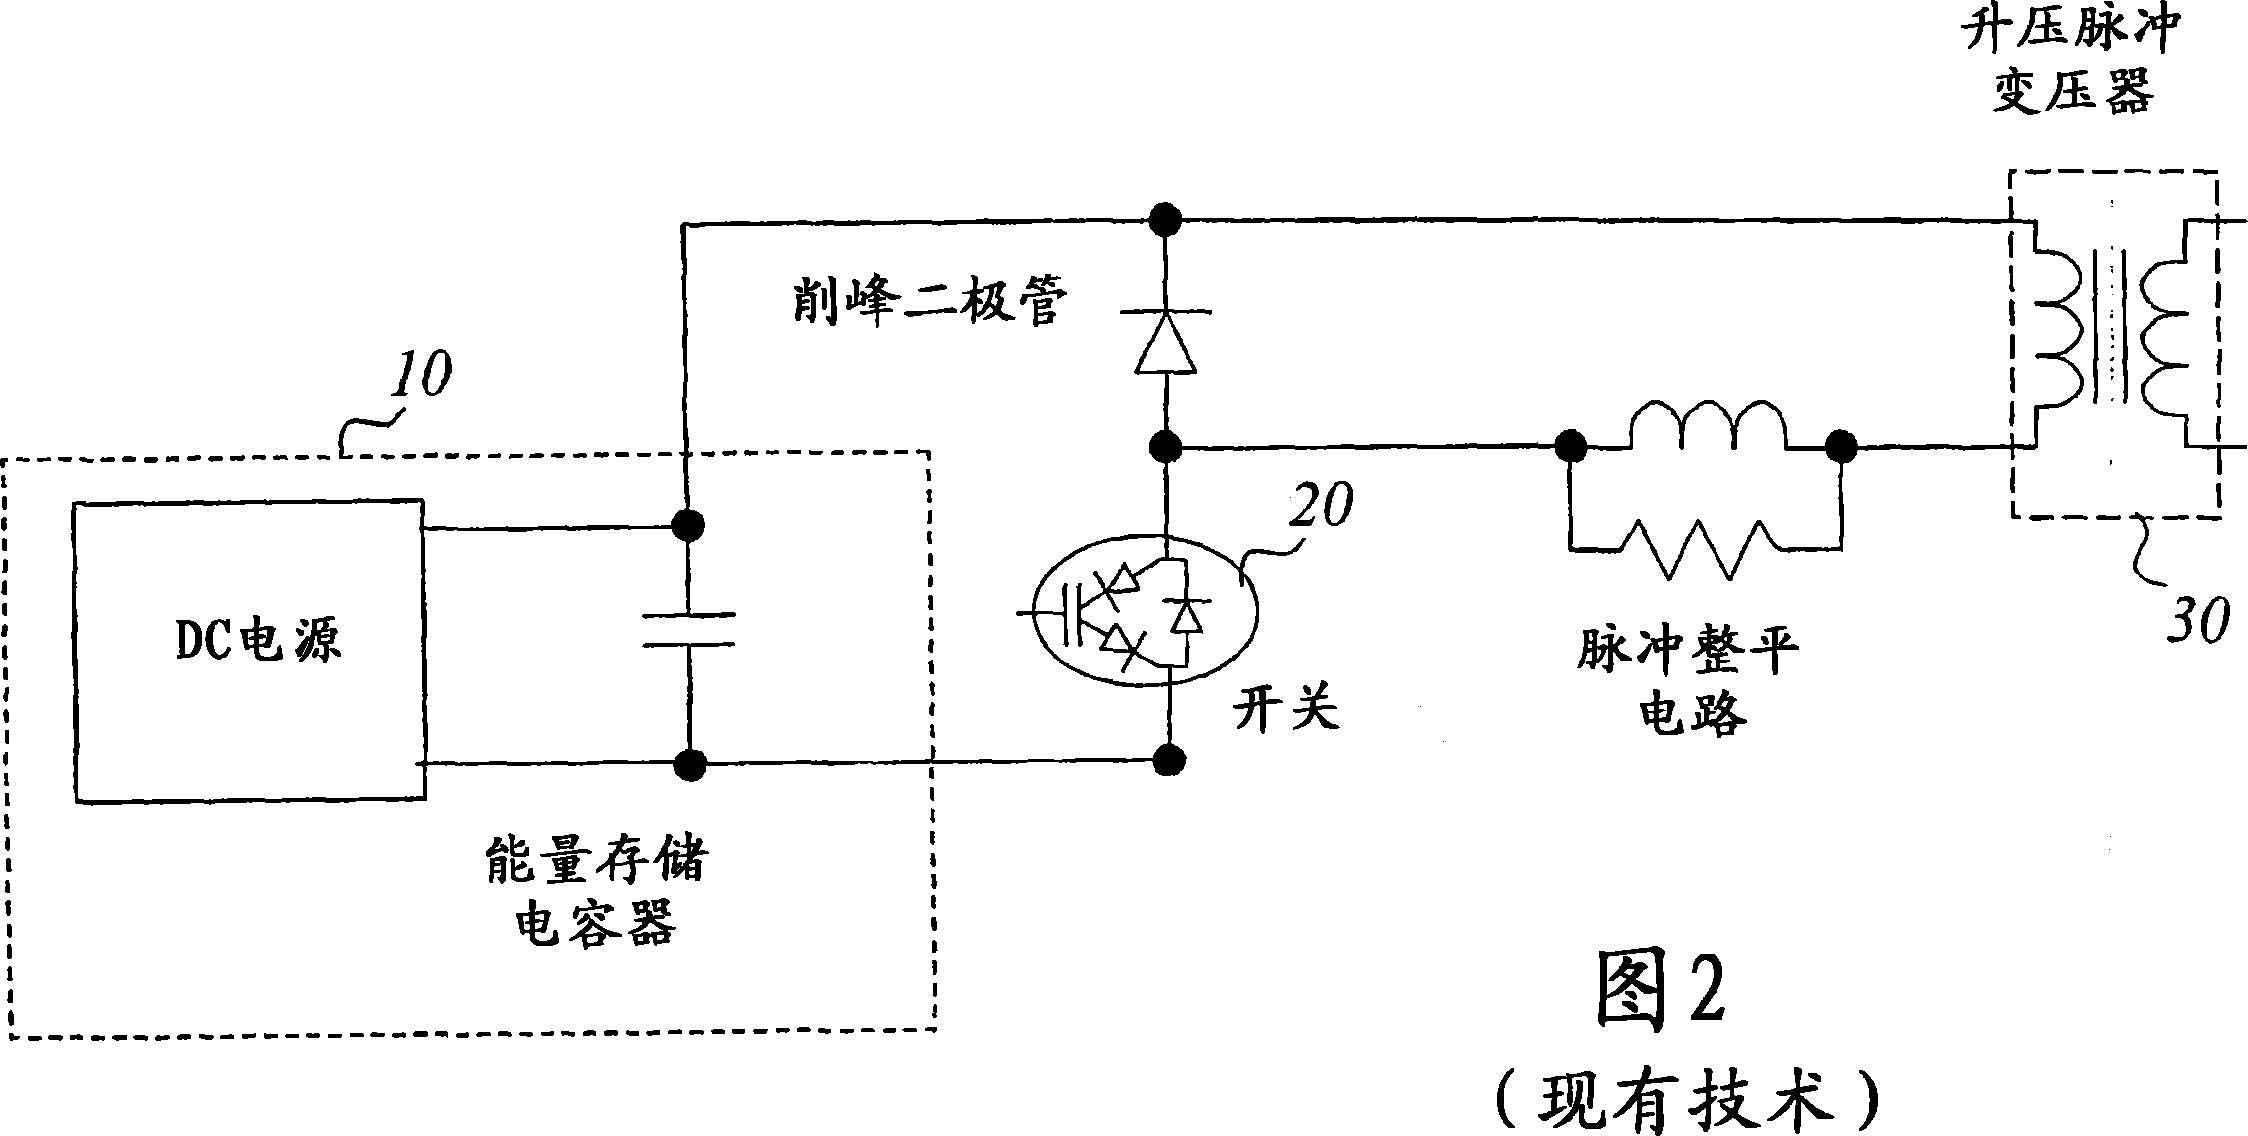 Electrical power switching with efficient switch protection